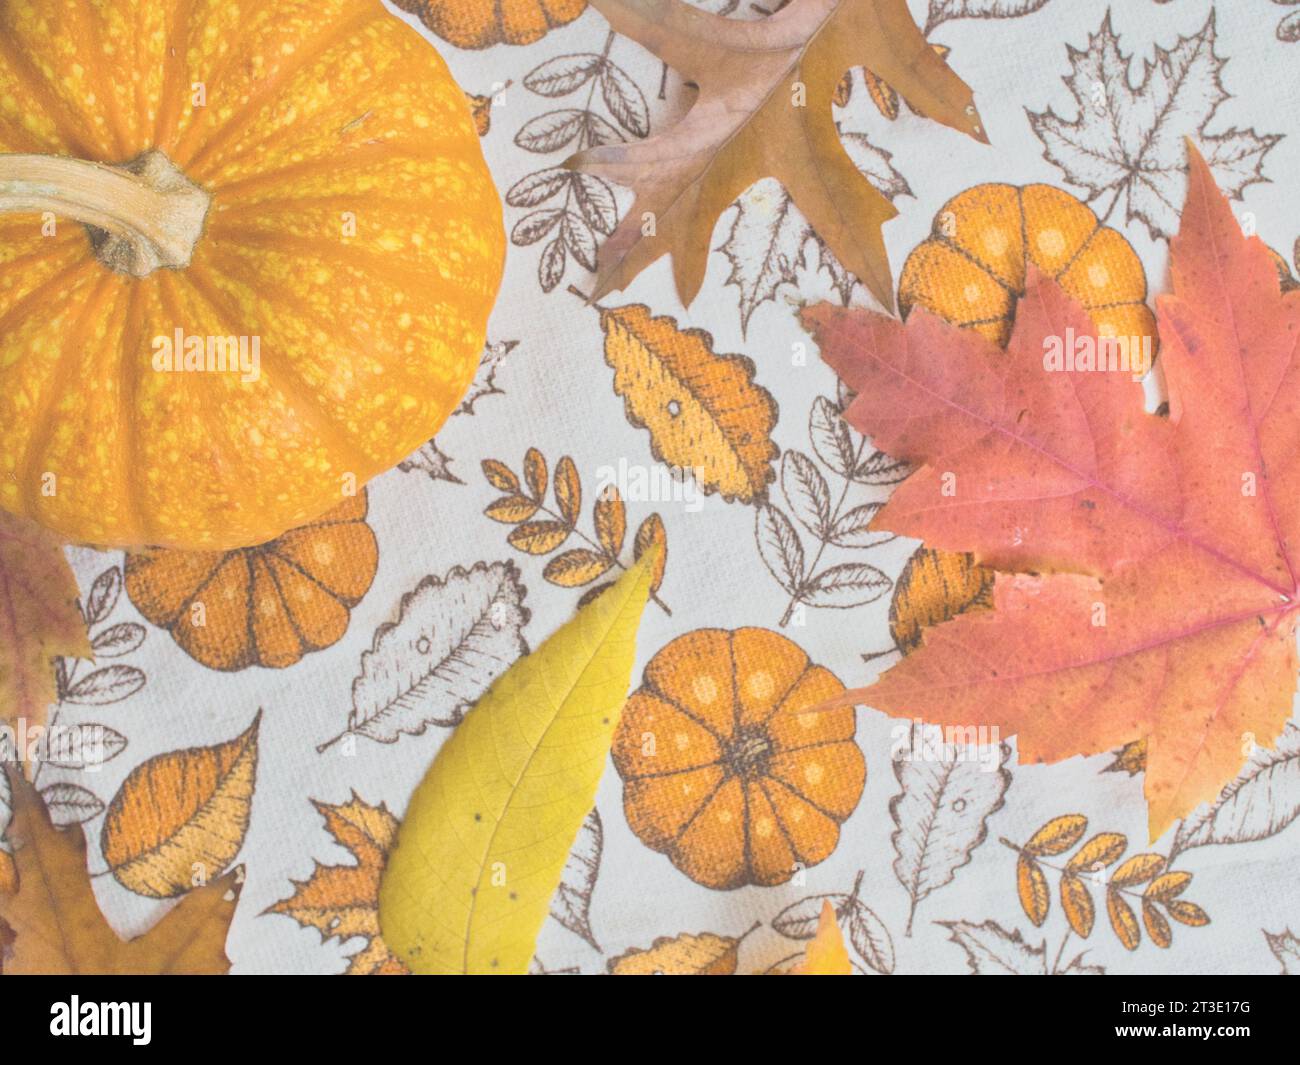 Desaturated faded image of pumpkin gourd with colorful fall leaves for background or with text. Festive autumn imagery for Halloween or Thanksgiving. Stock Photo